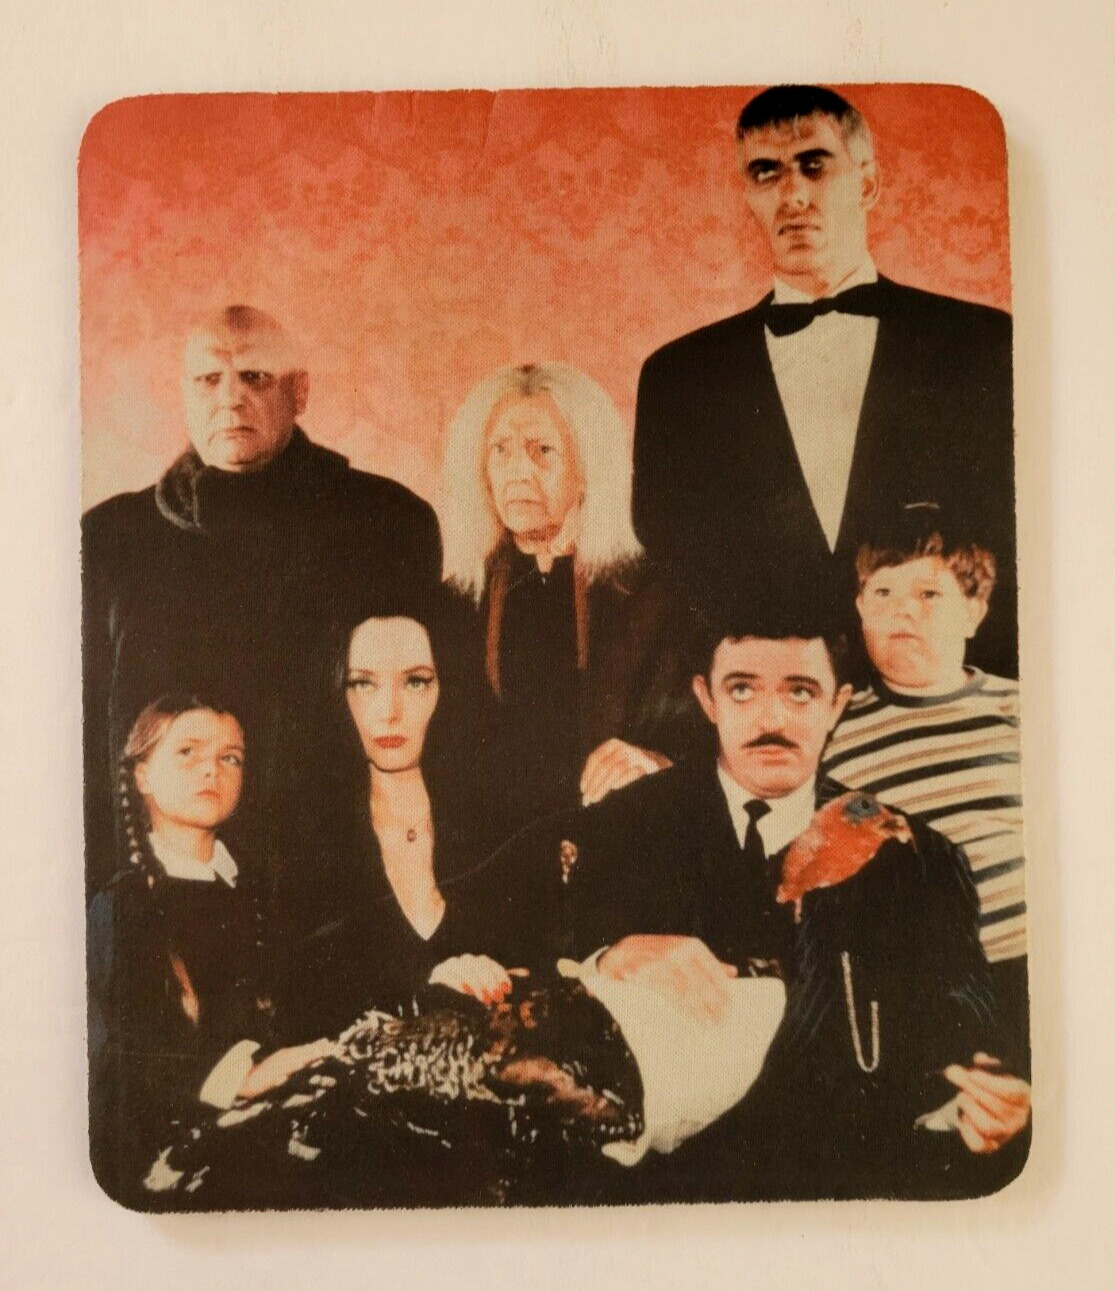 The Addams Family TV Show Retro Halloween Office Mouse Pad 1/4 Thick 8x9 Inches